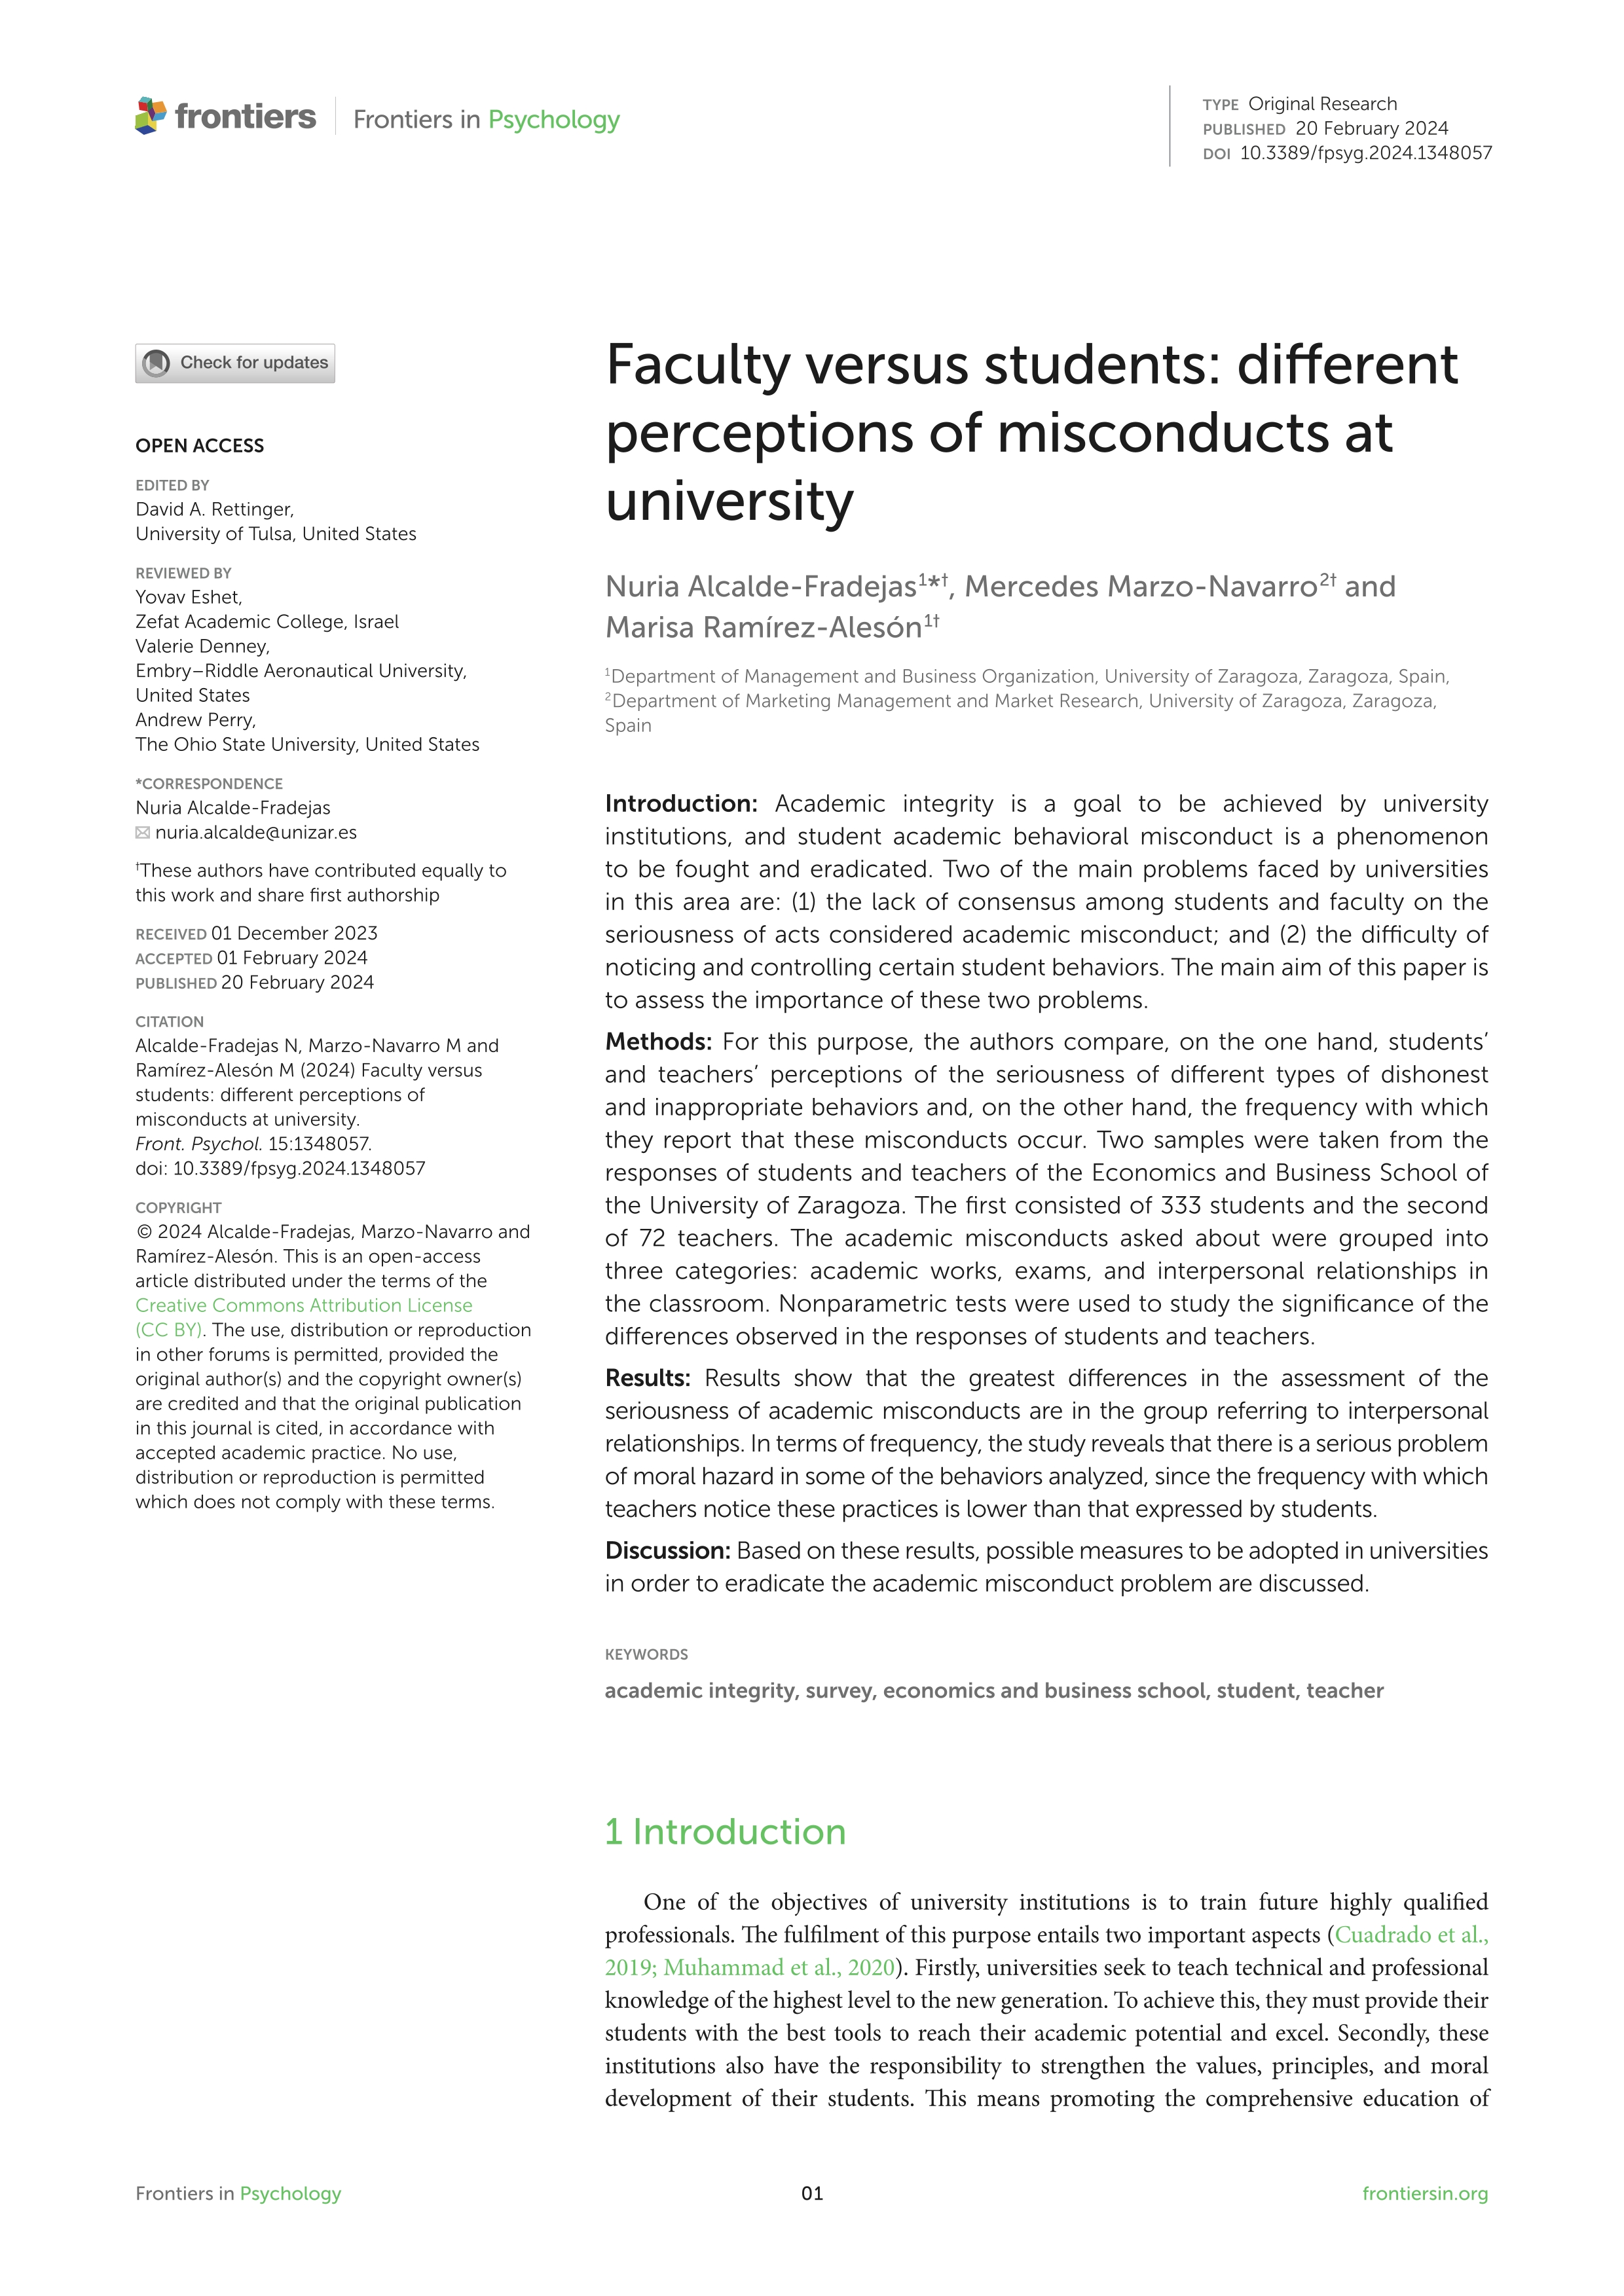 Faculty versus students: different perceptions of misconducts at university